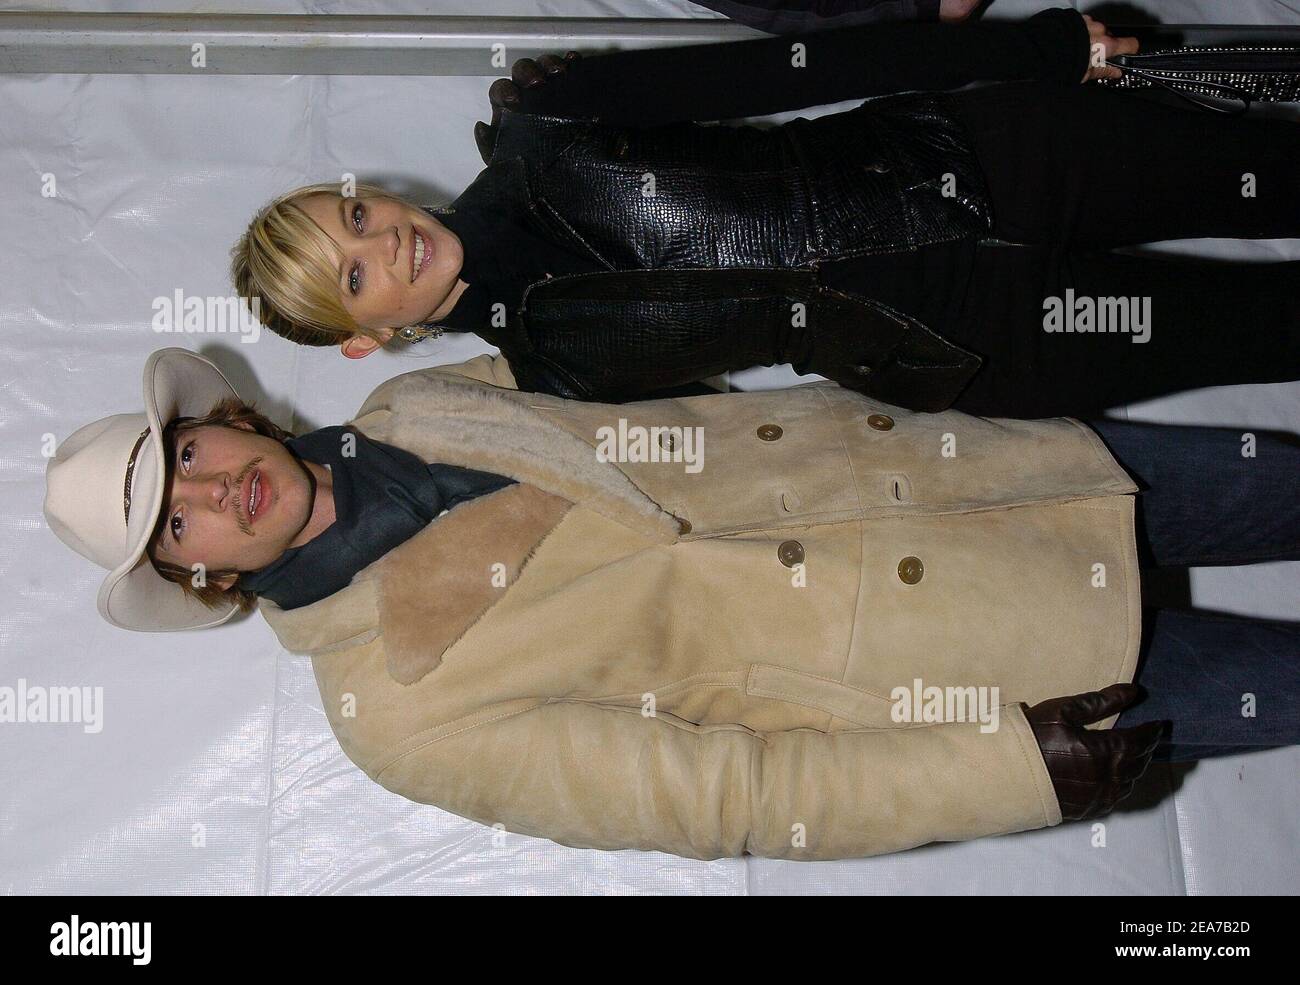 Ashton Kutcher and Amy Smart attend the screening of The Butterfly Effect at the Eccles Theatre during the 2004 Sundance Film Festival. Park City, January 17, 2004. (Pictured: Ashton Kutcher, Amy Smart). Photo by Lionel Hahn/Abaca. Stock Photo